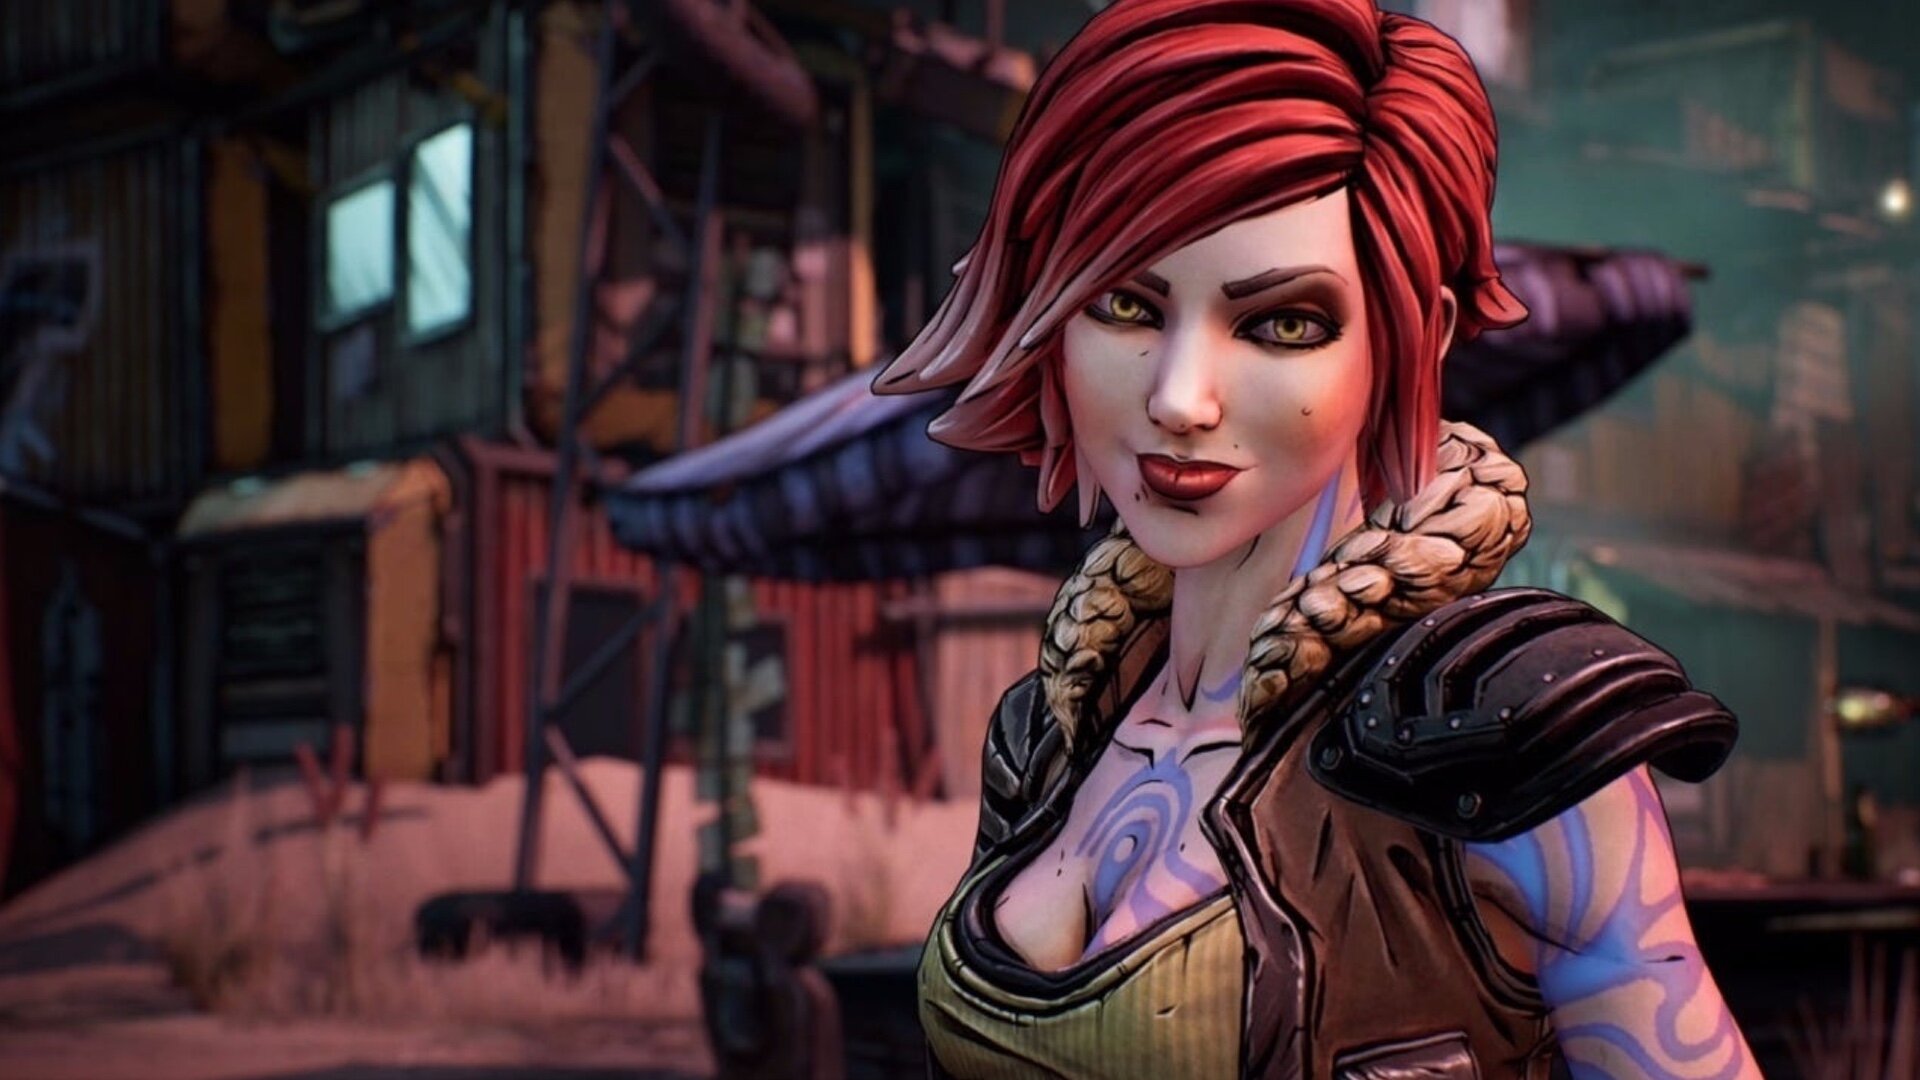 Will Borderlands Movie Miss the Mark? Why Fans Prefer Animated Stories for Game Hits